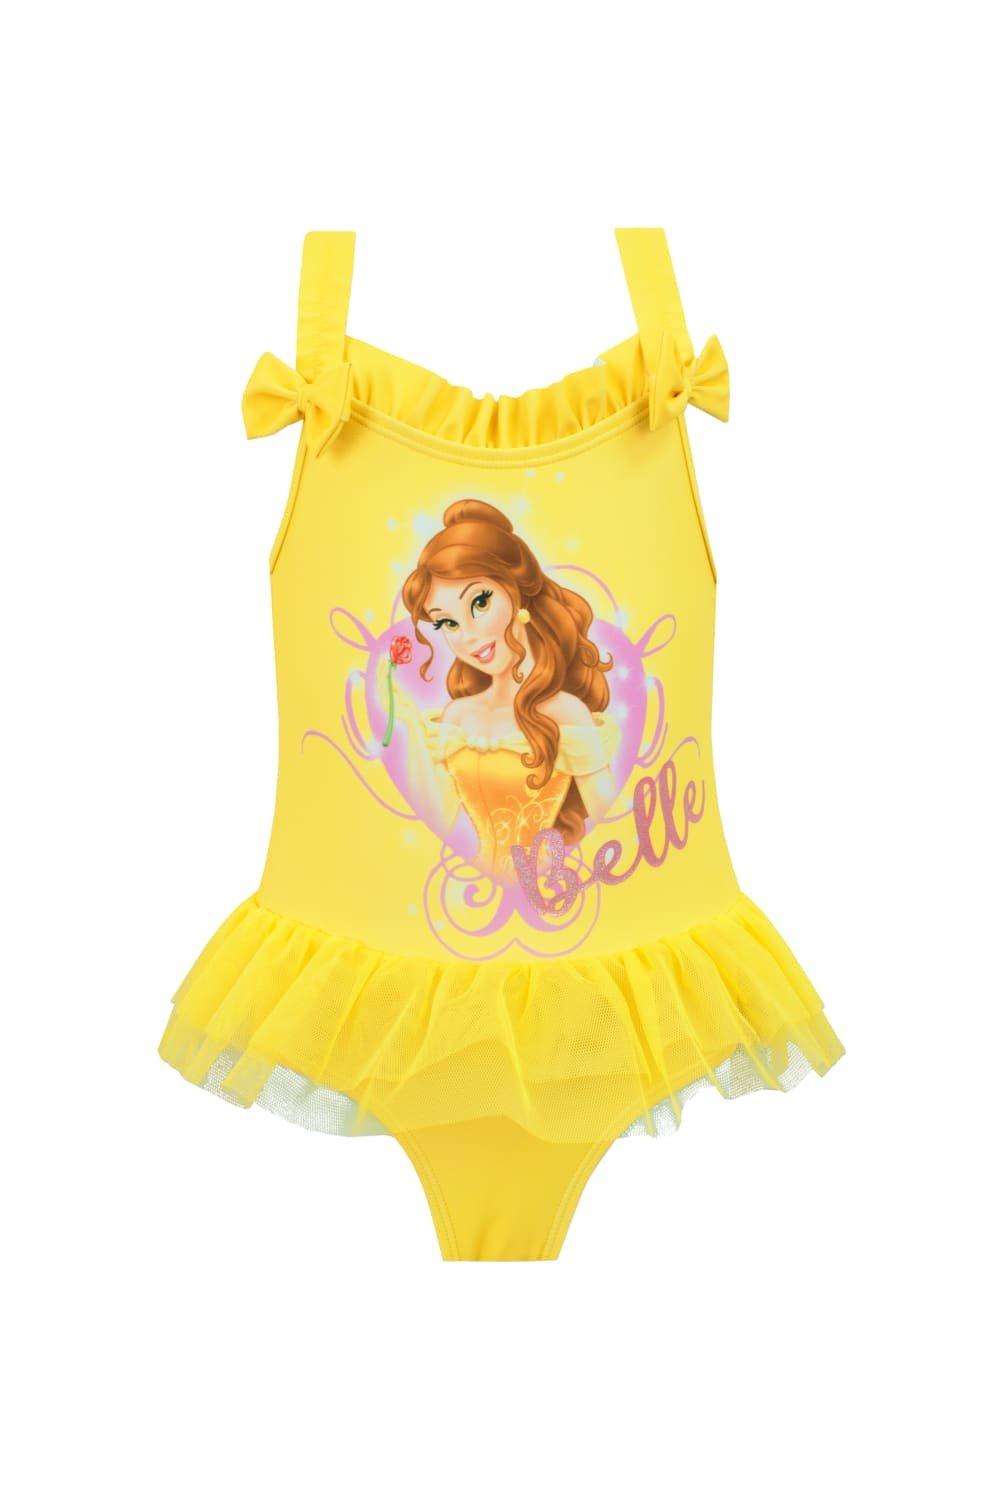 Beauty and The Beast Swimsuit